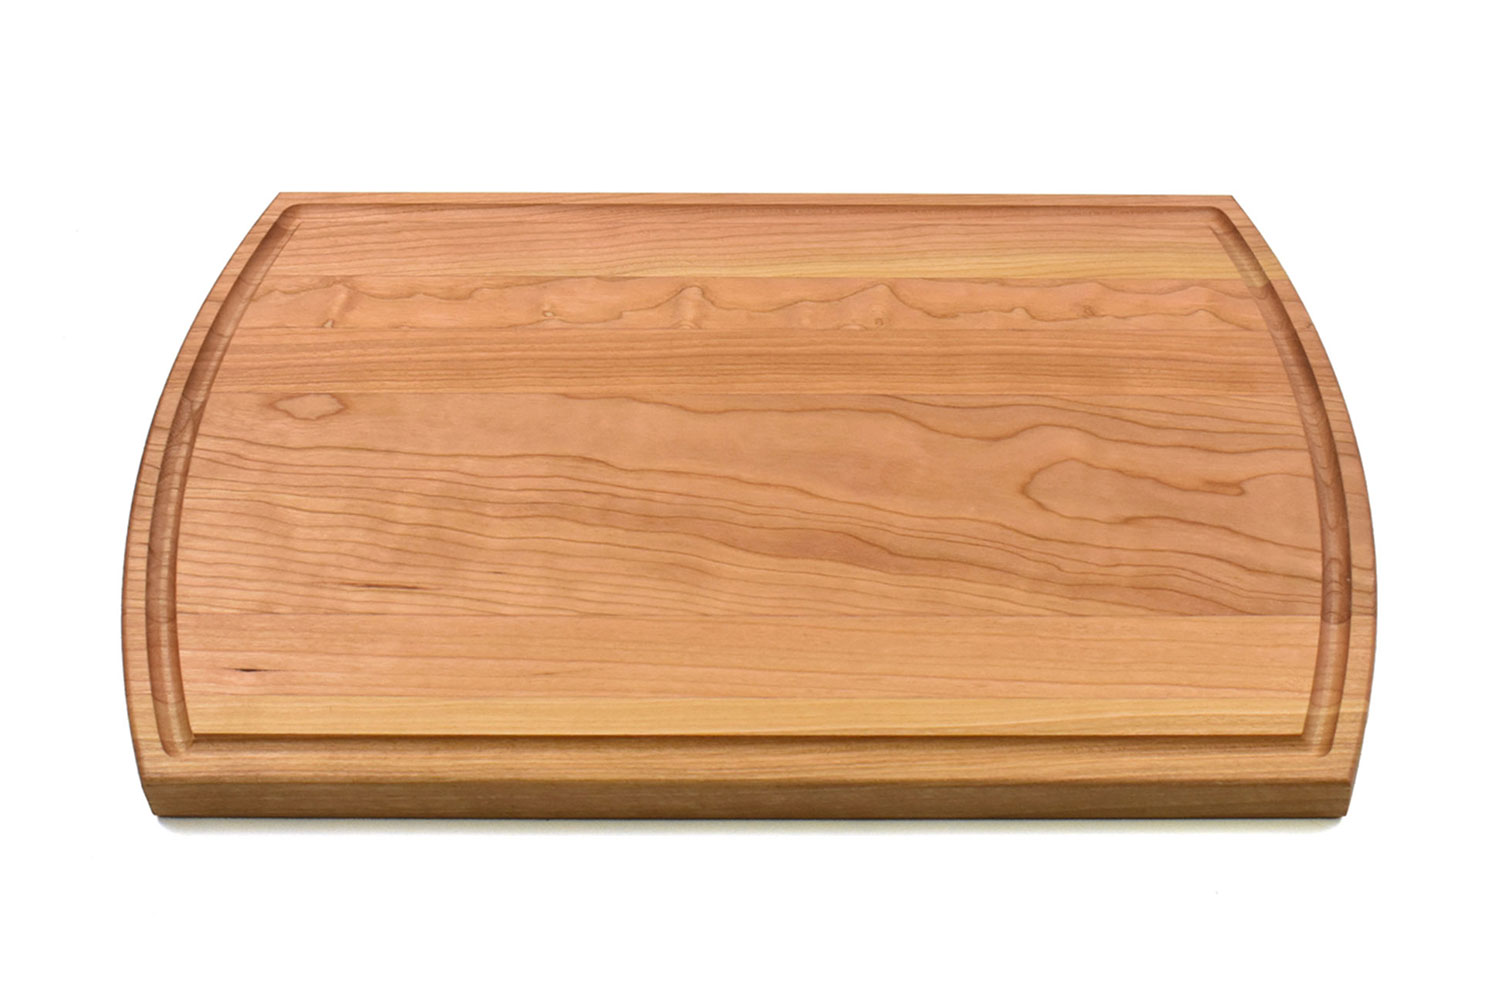 Large Canadian Made Cherry Wood Cutting Board, Personalised Engraving